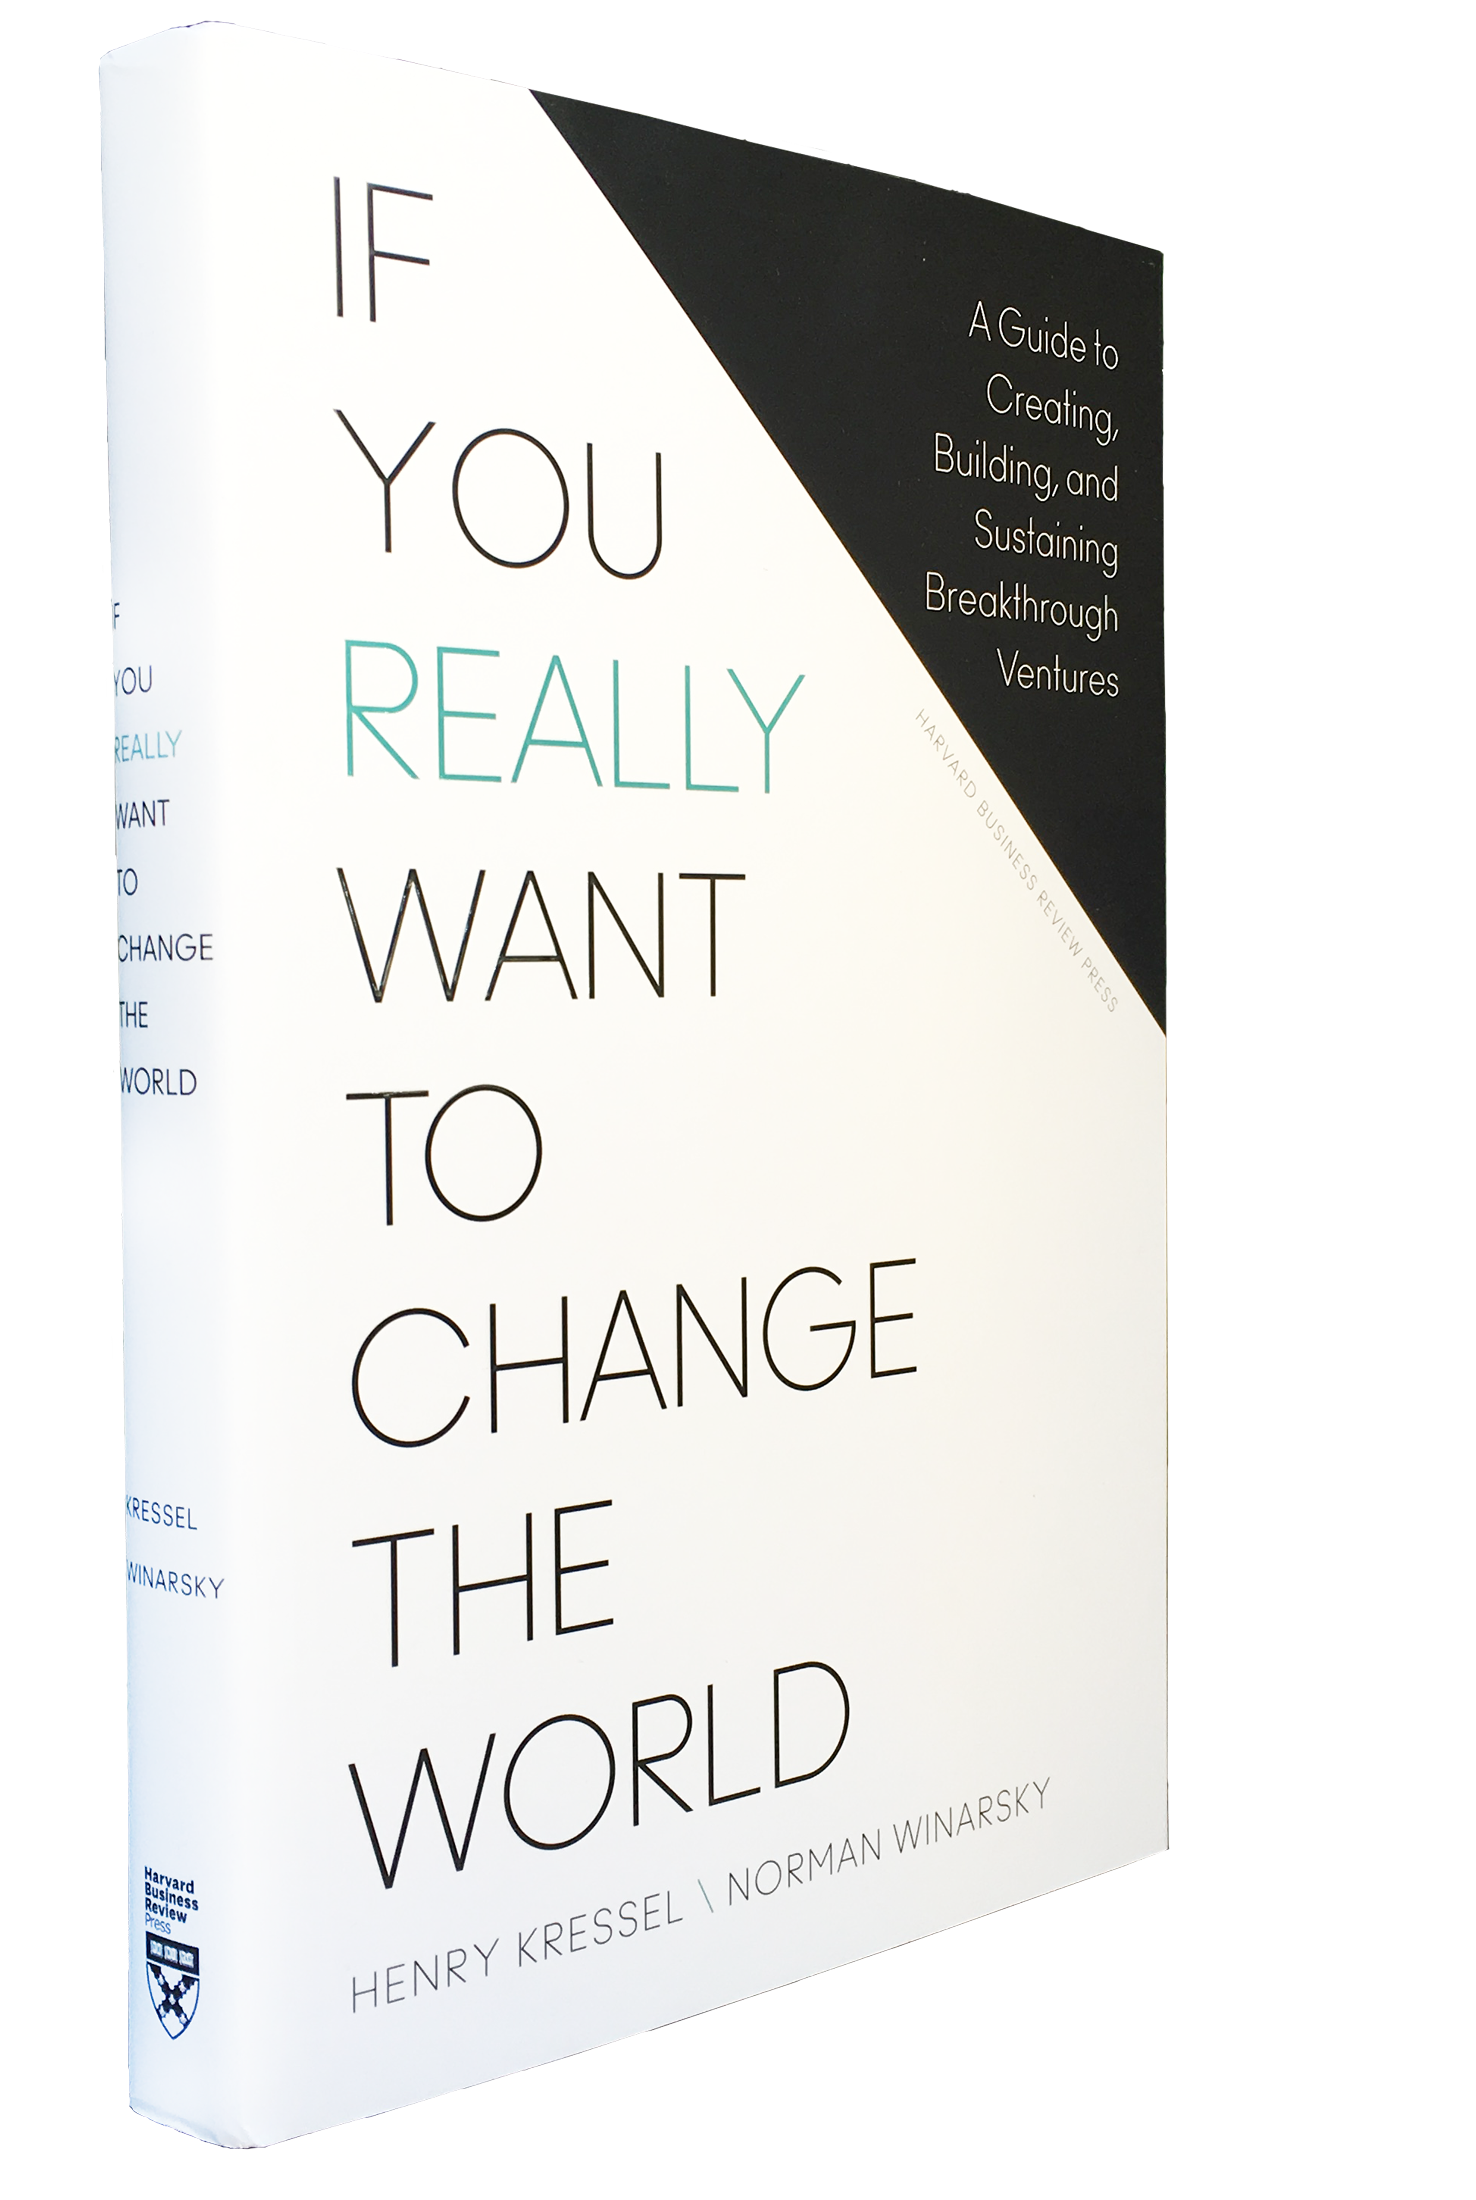 If You Really Want to Change the World book cover